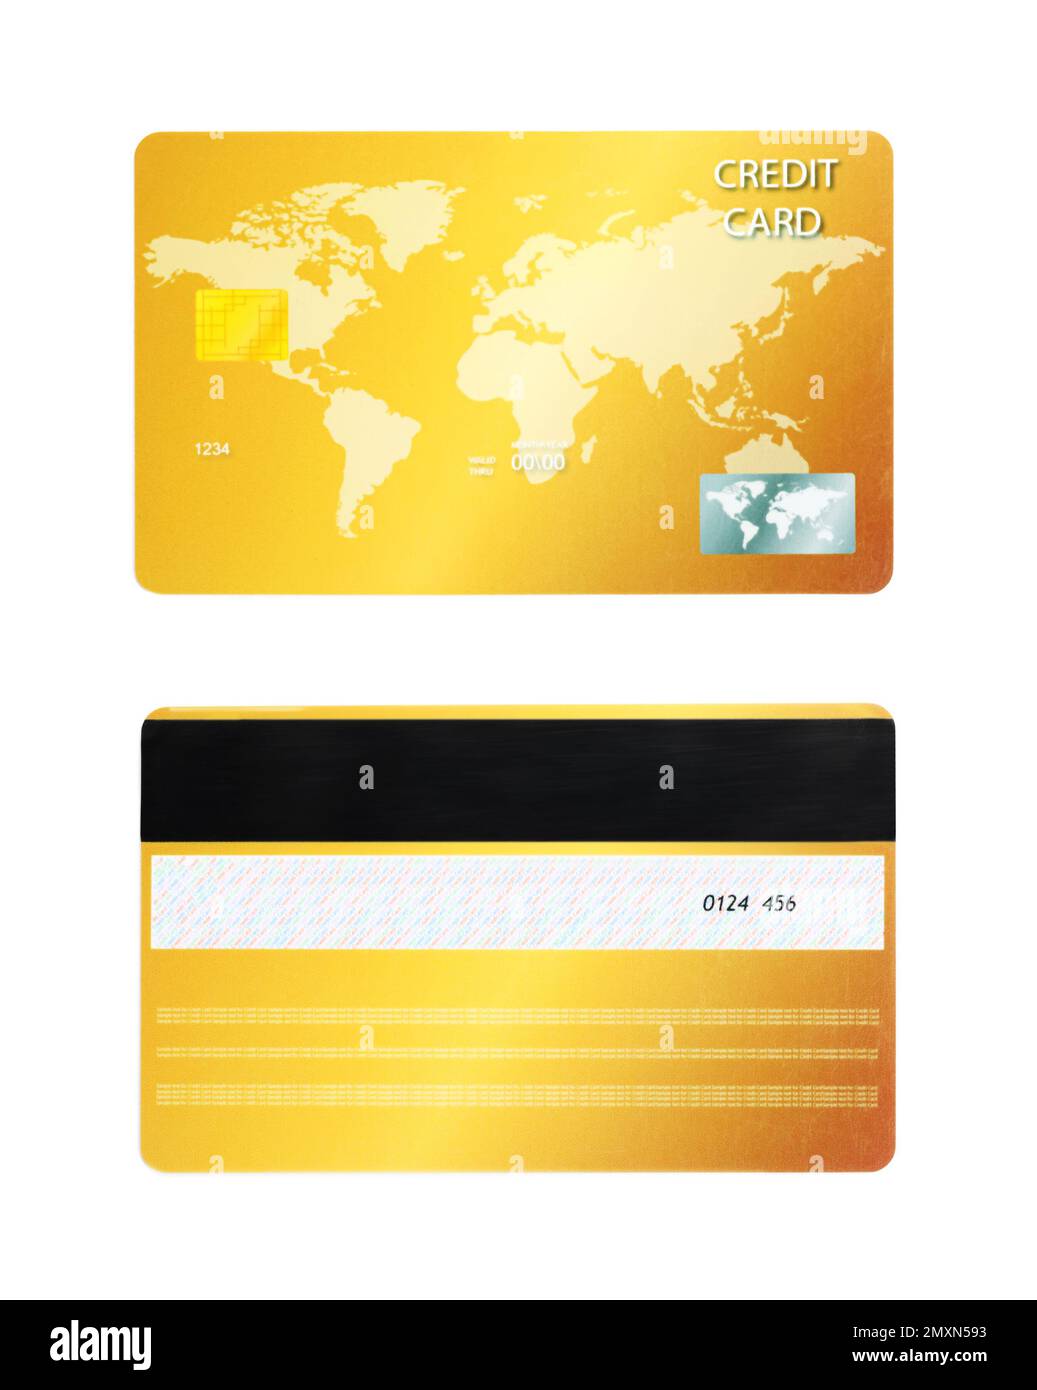 Modern credit card on white background, front and back view Stock Photo